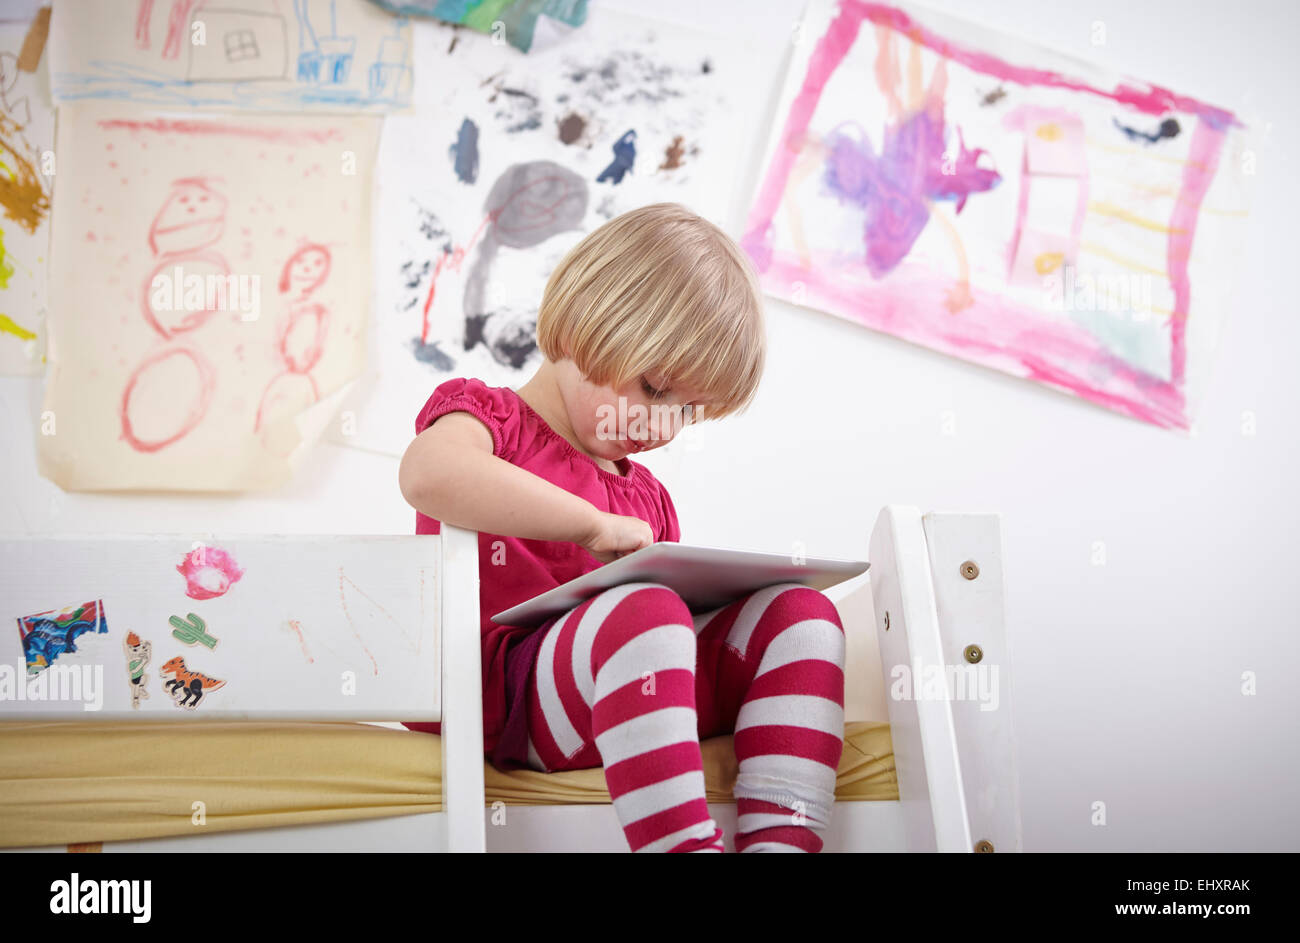 Little girl sitting on bunk bed, drawing on touch pad Stock Photo